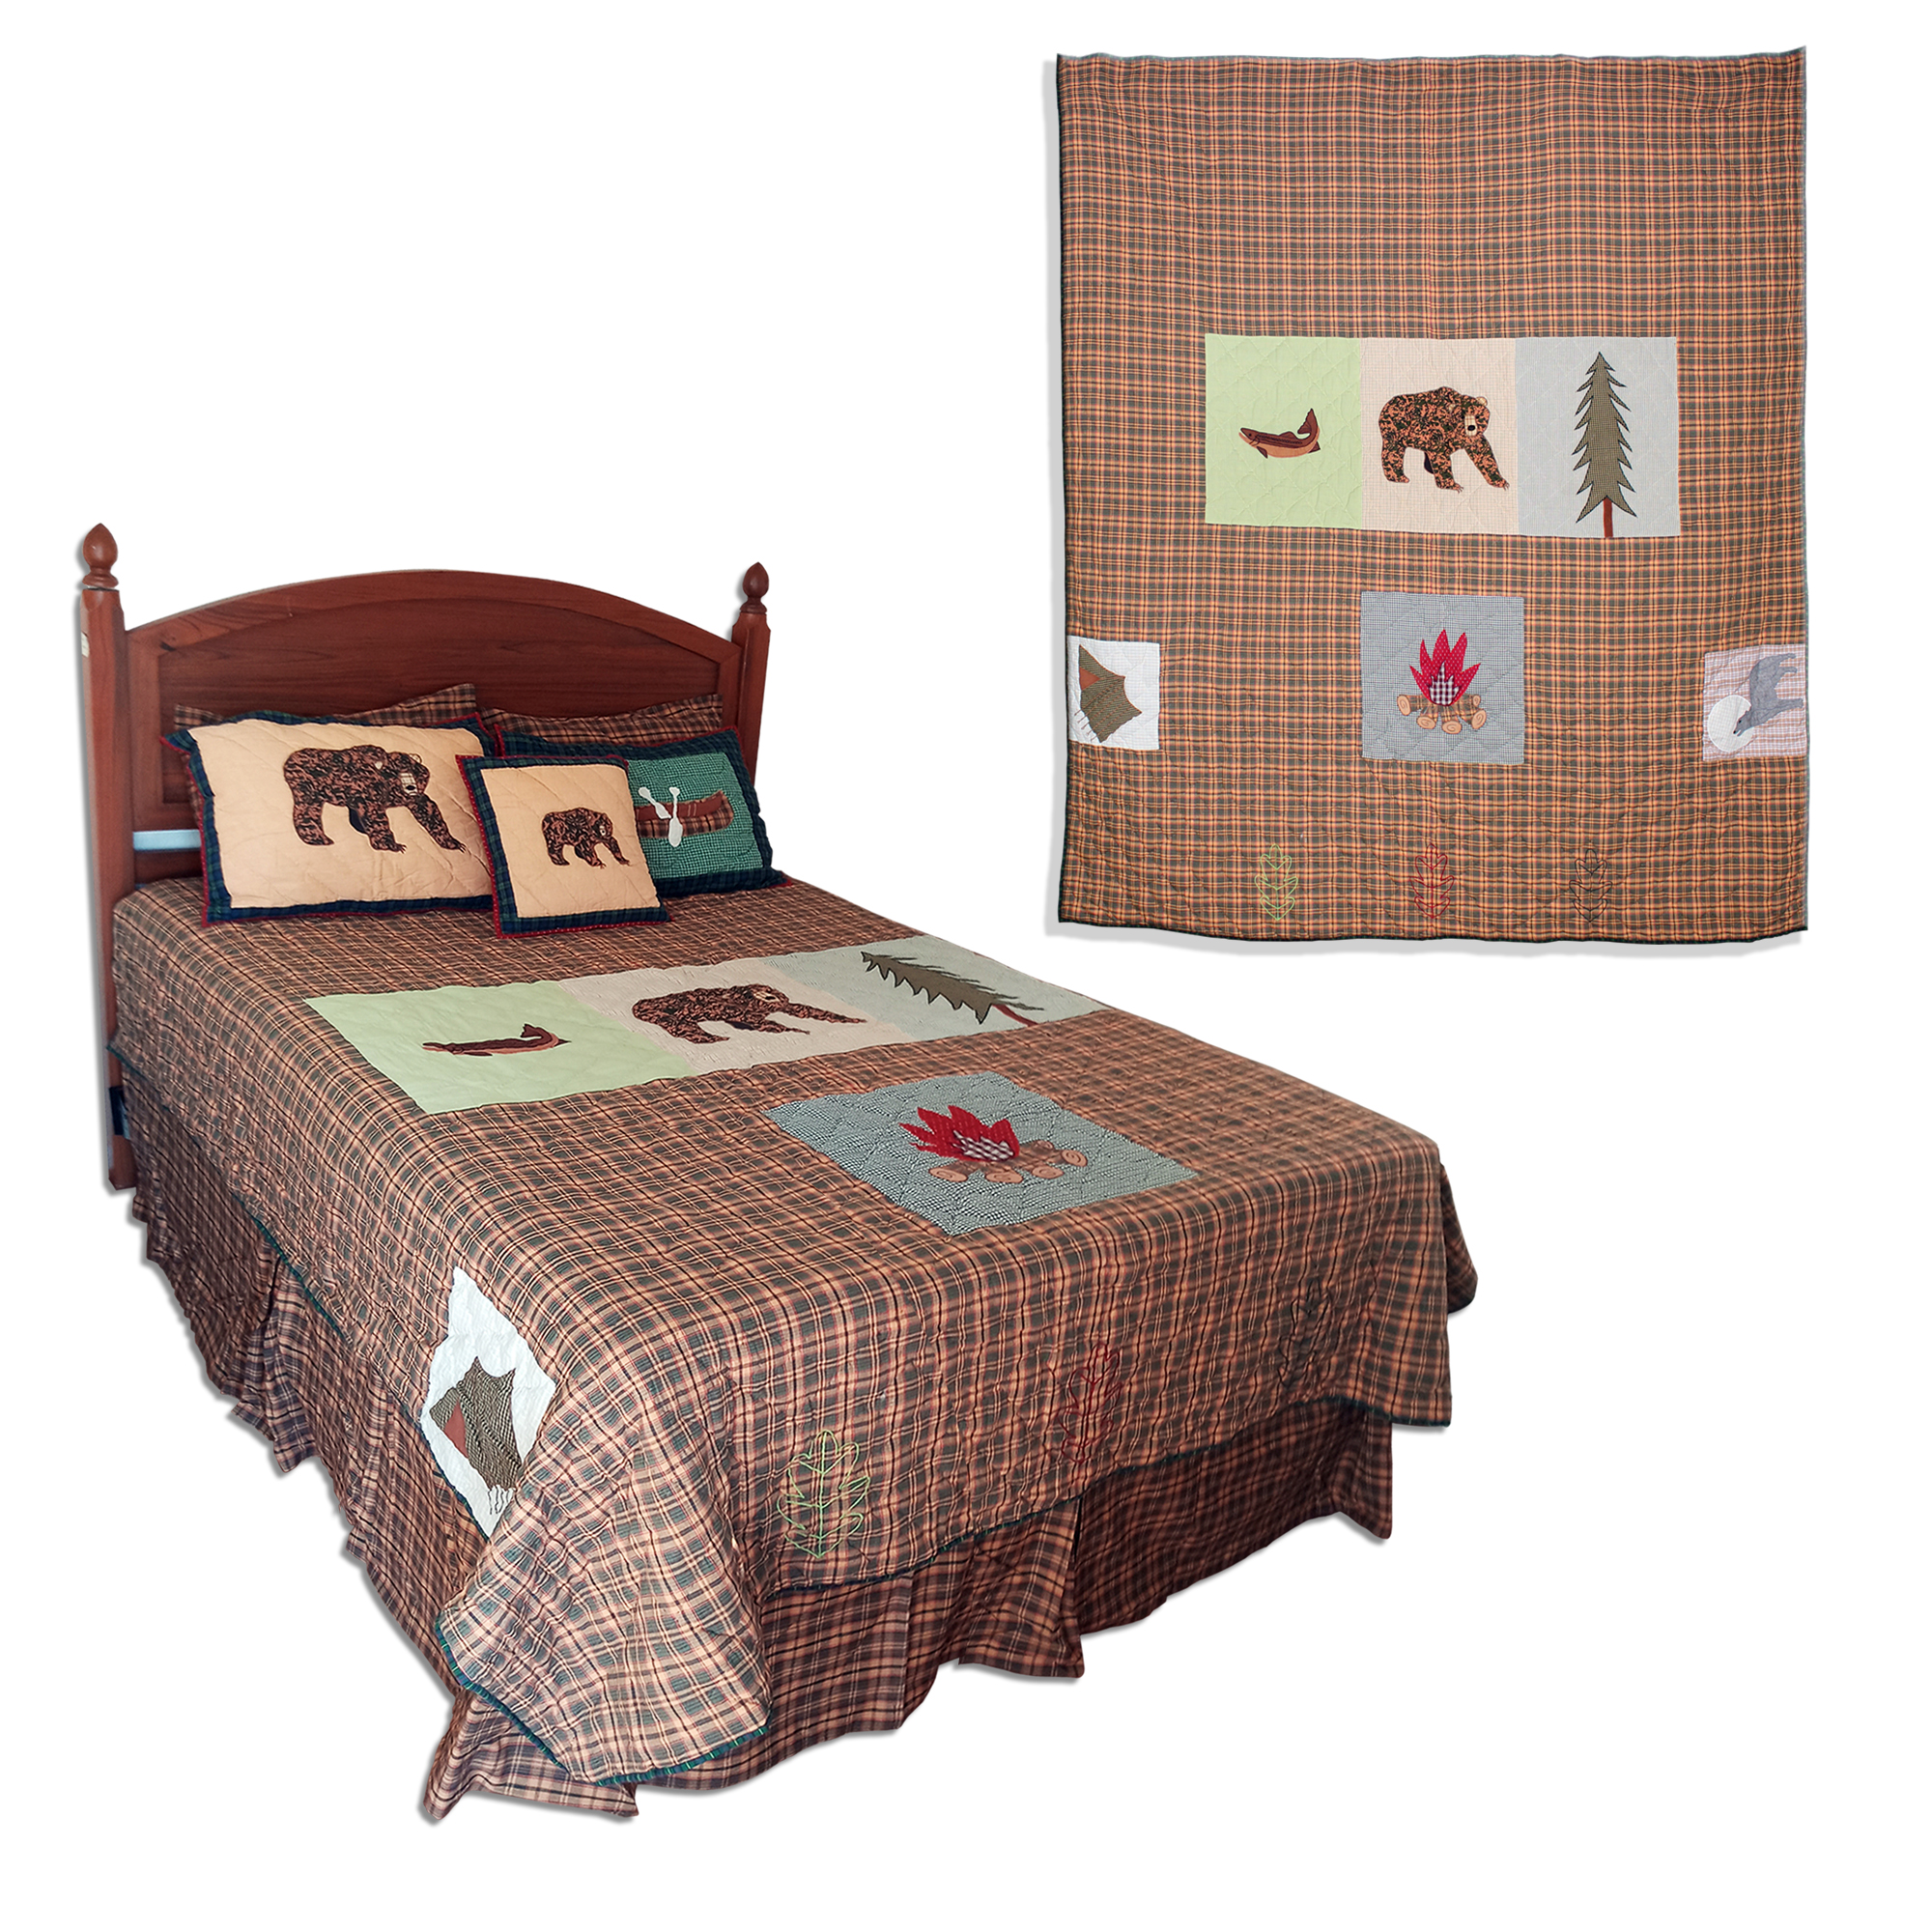 Backwoods Trek, Gold and Brown Plaid Luxury King Quilt 120"W x 106"L